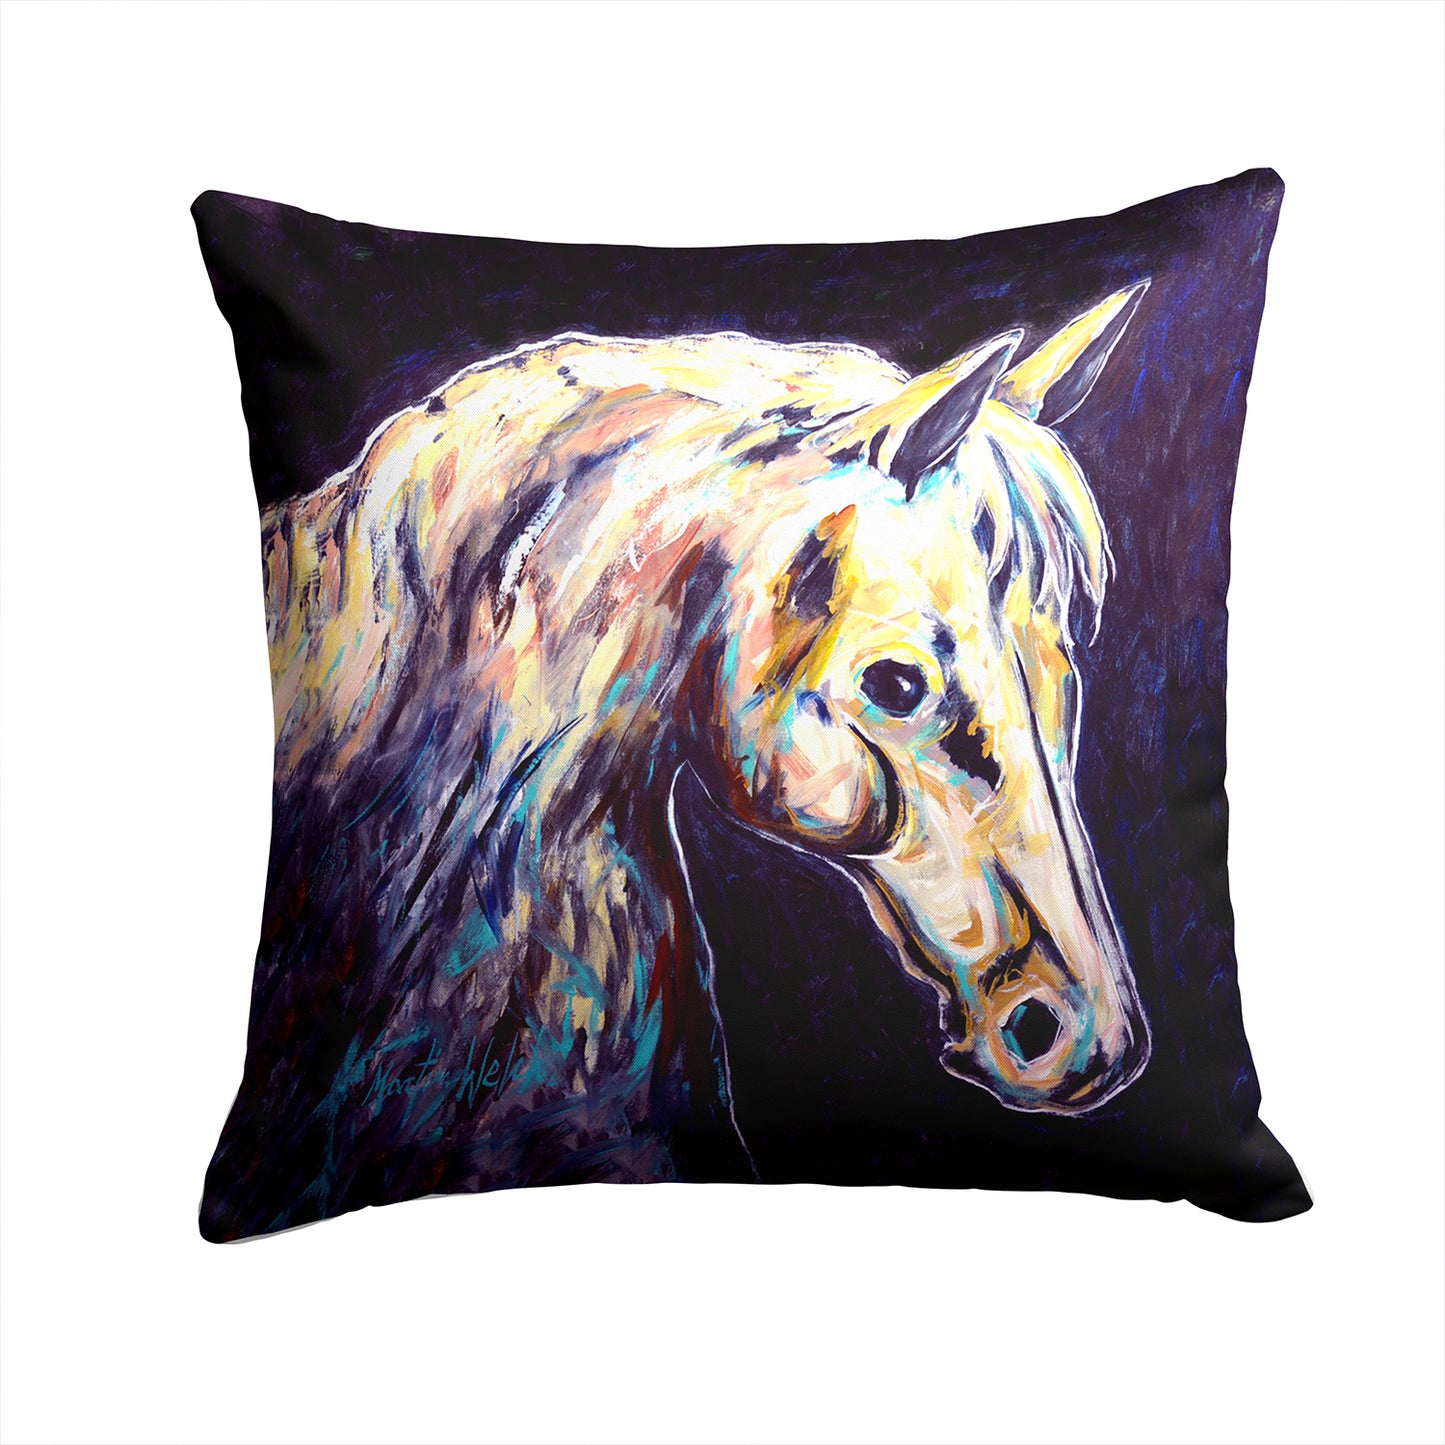 Buy this Knight Horse Fabric Decorative Pillow